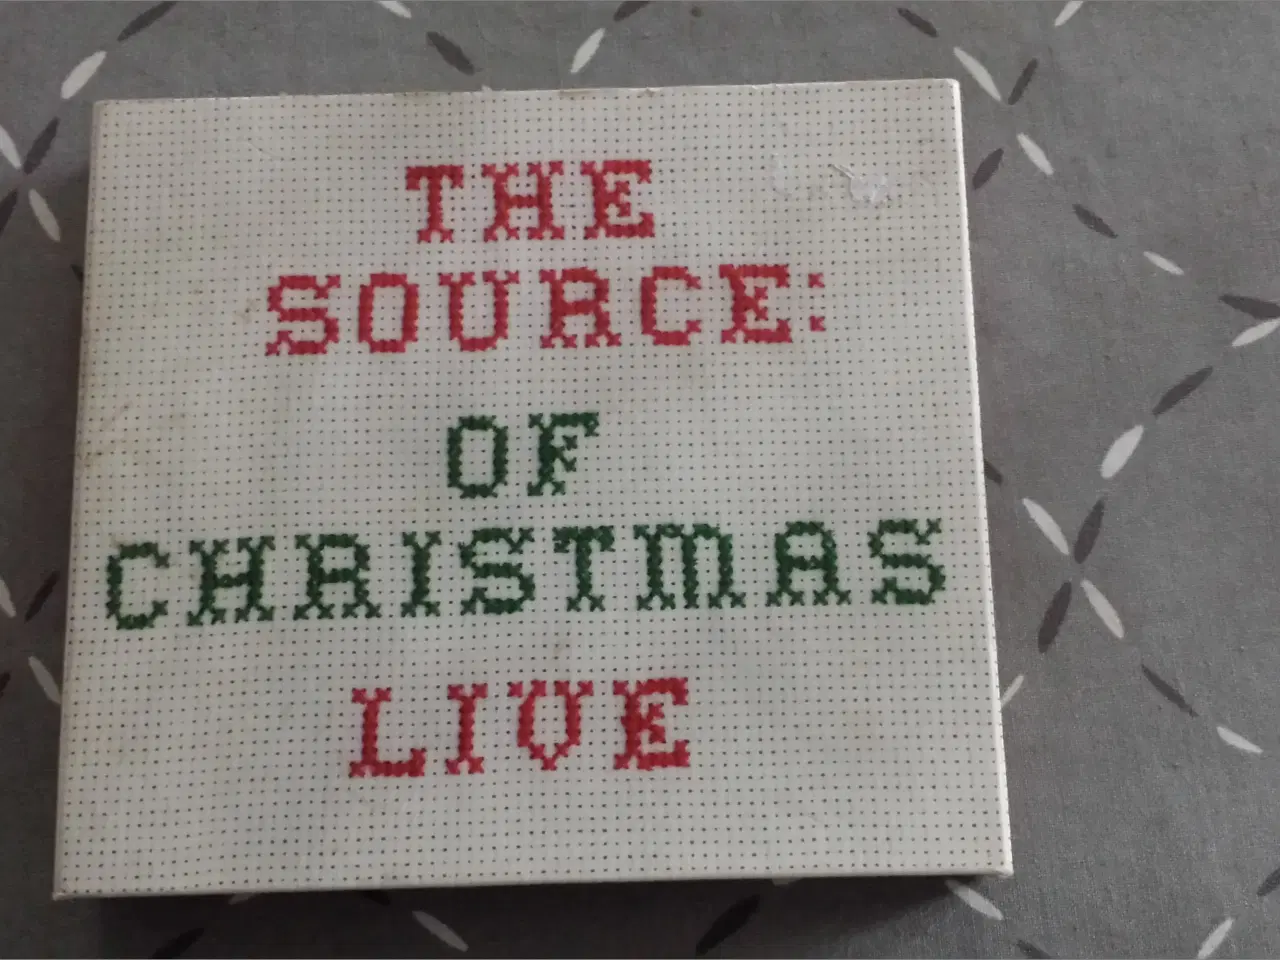 Billede 1 - The Source of Christmas live